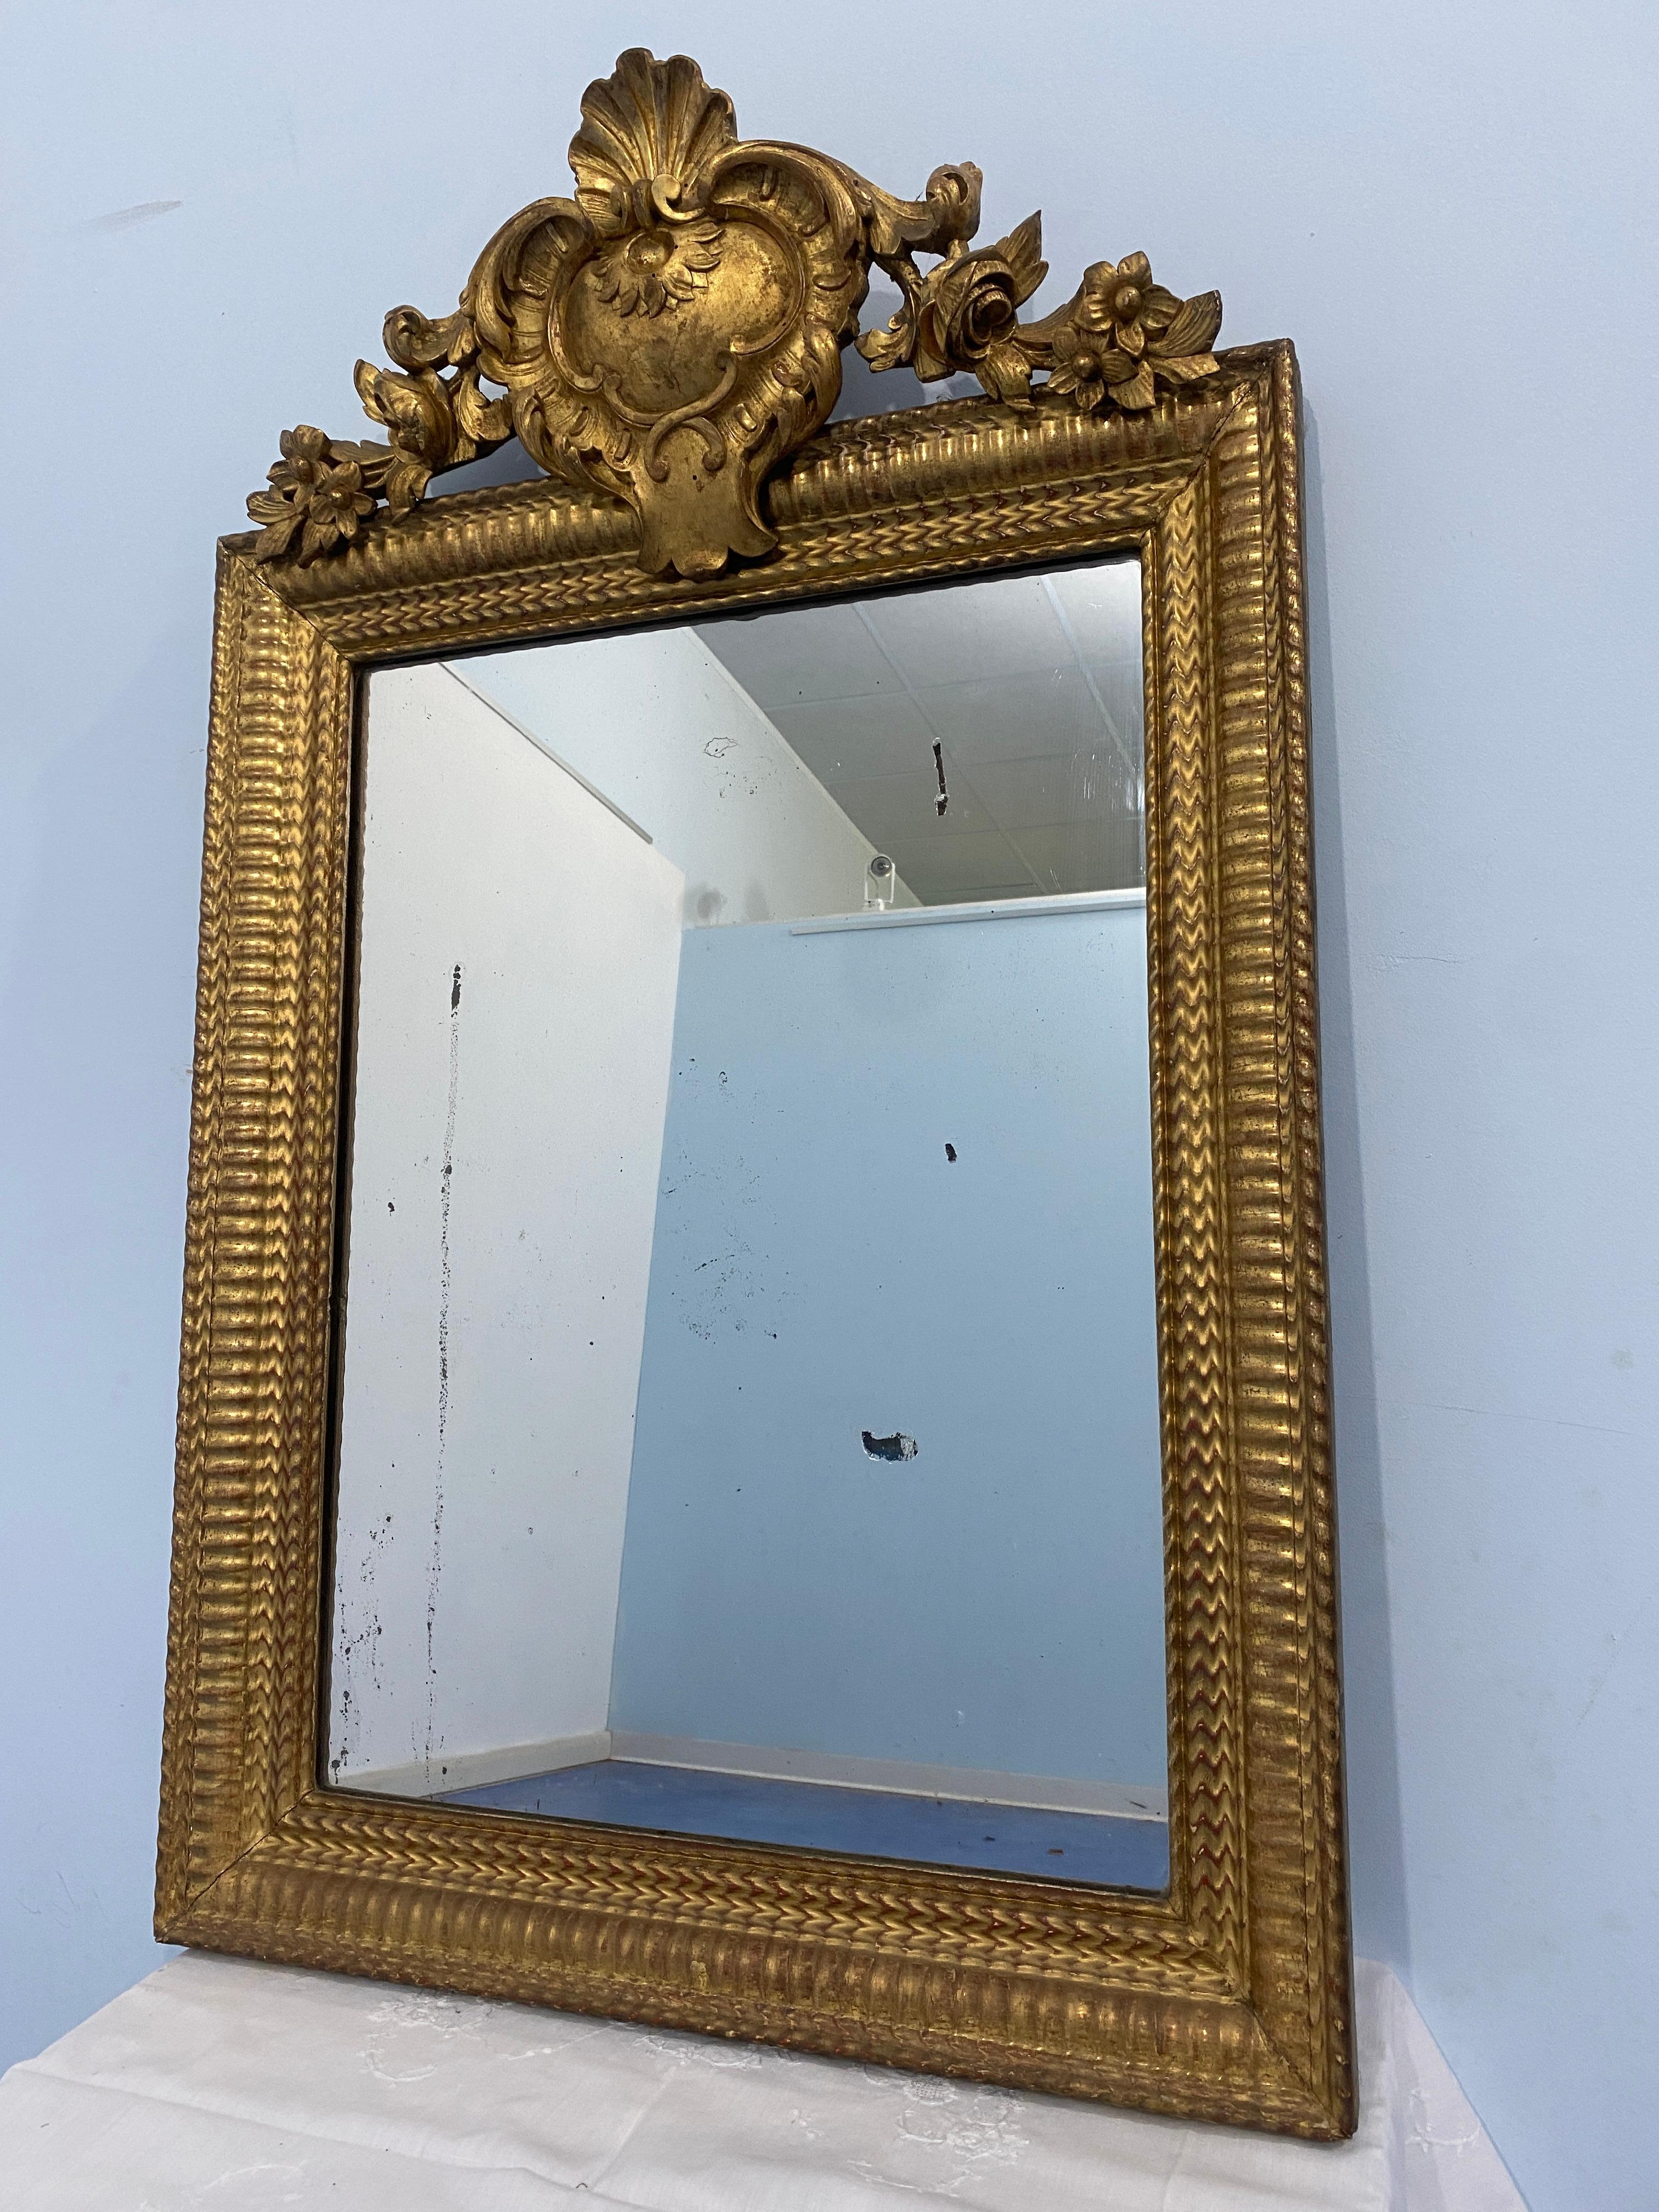 Antique French Louis Philippe-era mirror gilded with gold leaf,very decorative and original is the design of the frame on the front,as of great quality of execution is the splendid wood-carved cyma with floral motifs on the sides.
The condition is